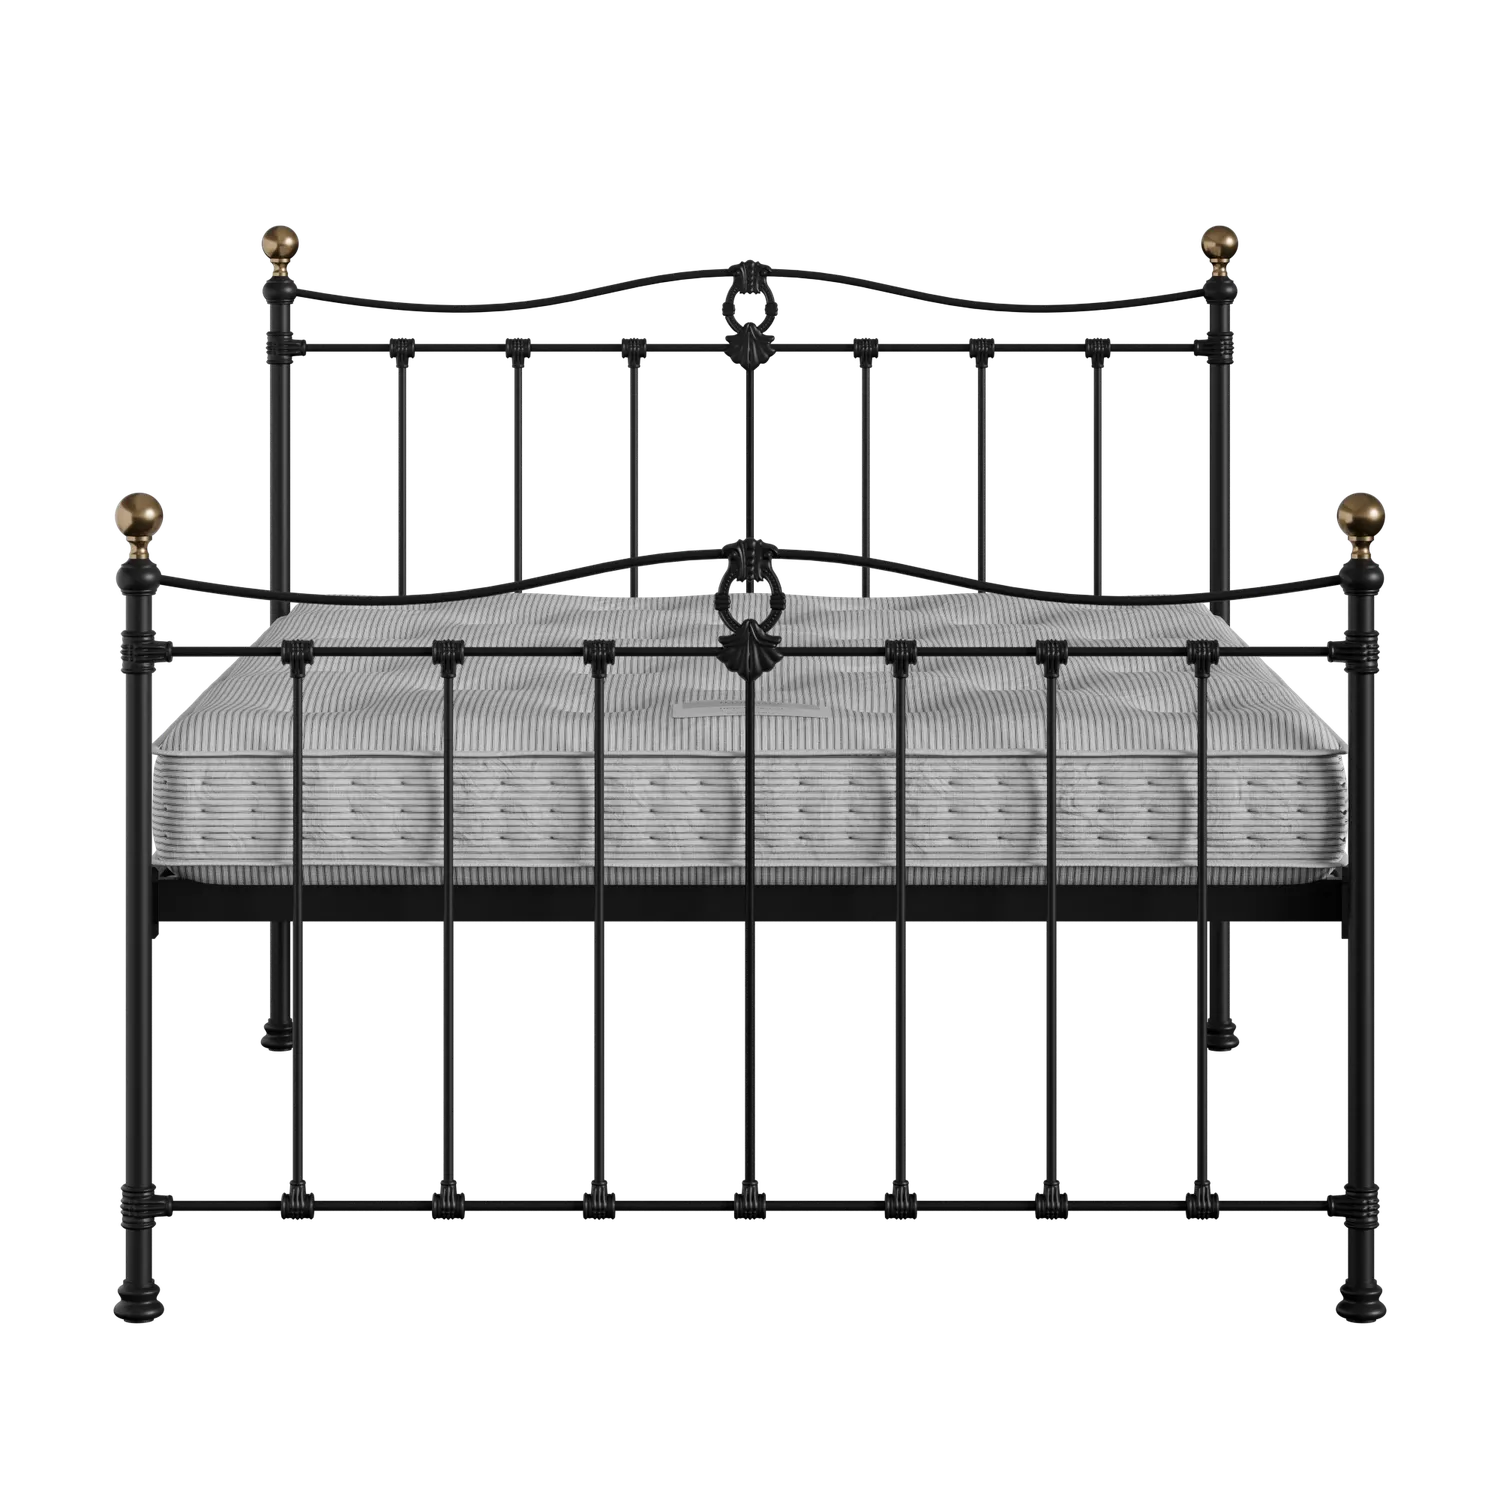 Tulsk iron/metal bed in black with Juno mattress